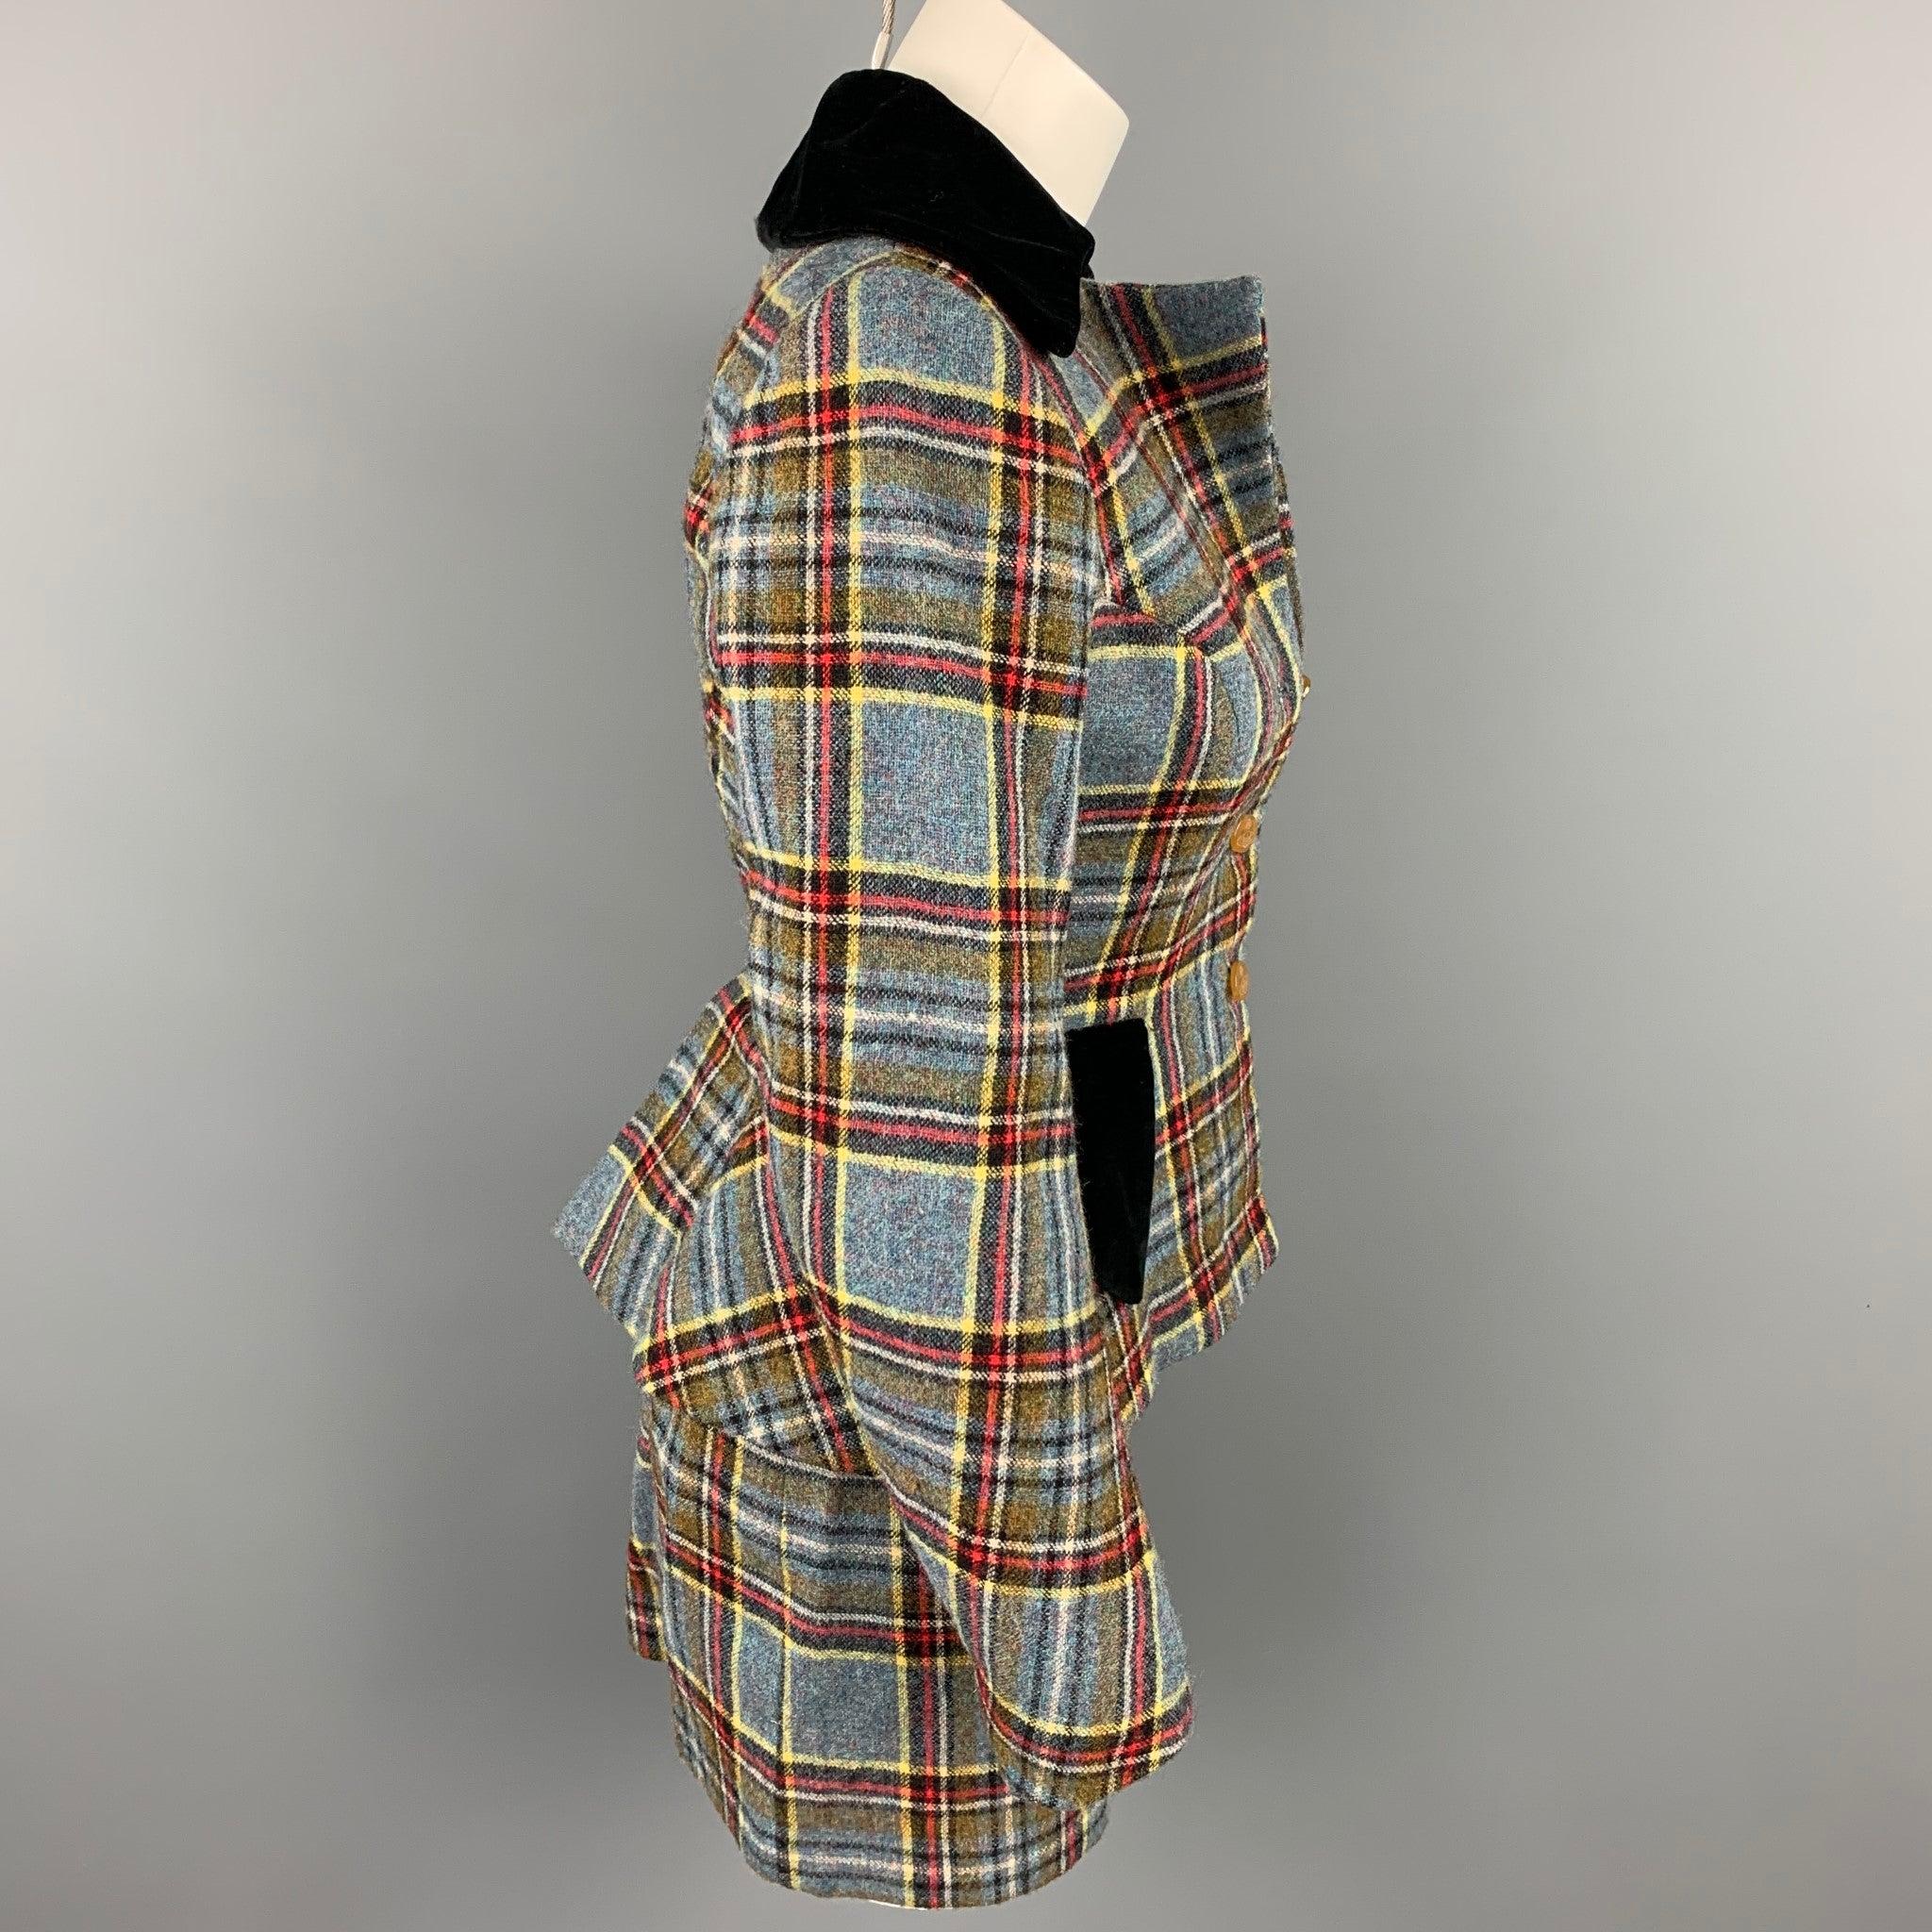 VIVIENNE WESTWOOD skirt suit from the iconic On Liberty Fall Winter 1994 collection comes in a blue & red plaid tartan wool with a full mono gram print liner featuring a velvet trim, a-line, flap pockets, and a three buttoned closure. Includes